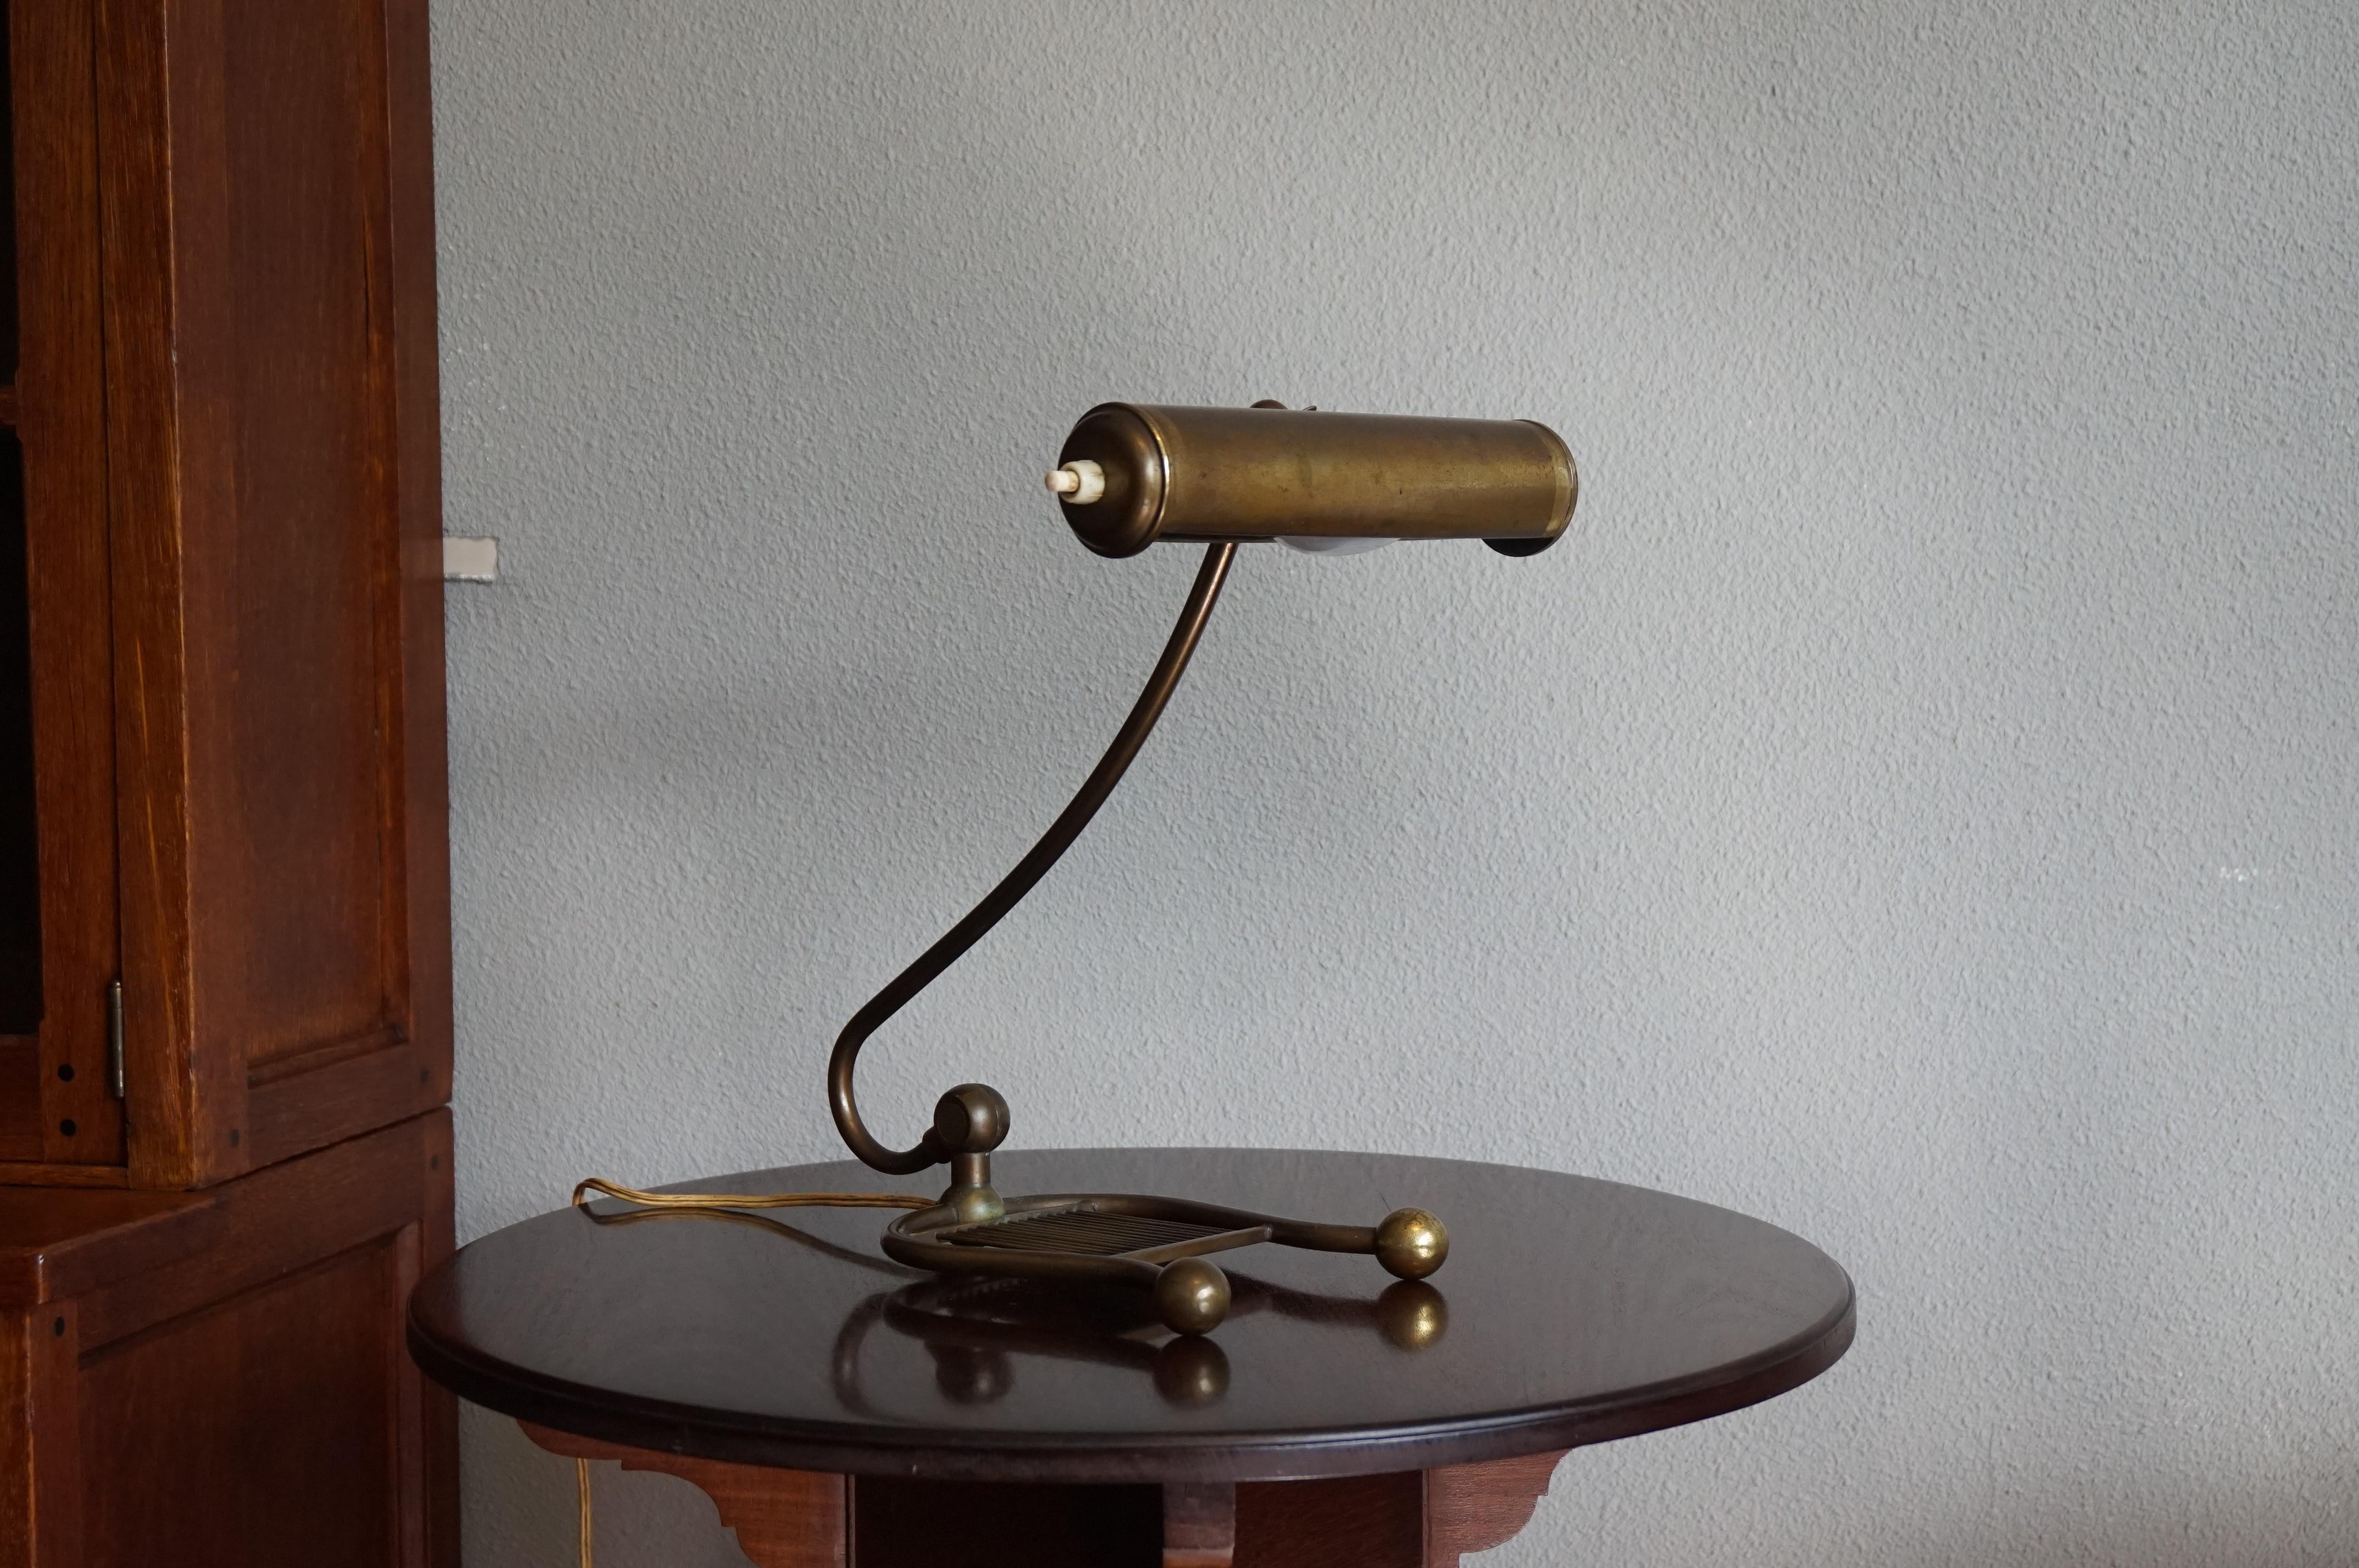 Stylish & Elegant Early to Mid-20th Century Harp Shaped Brass Piano or Desk Lamp 6